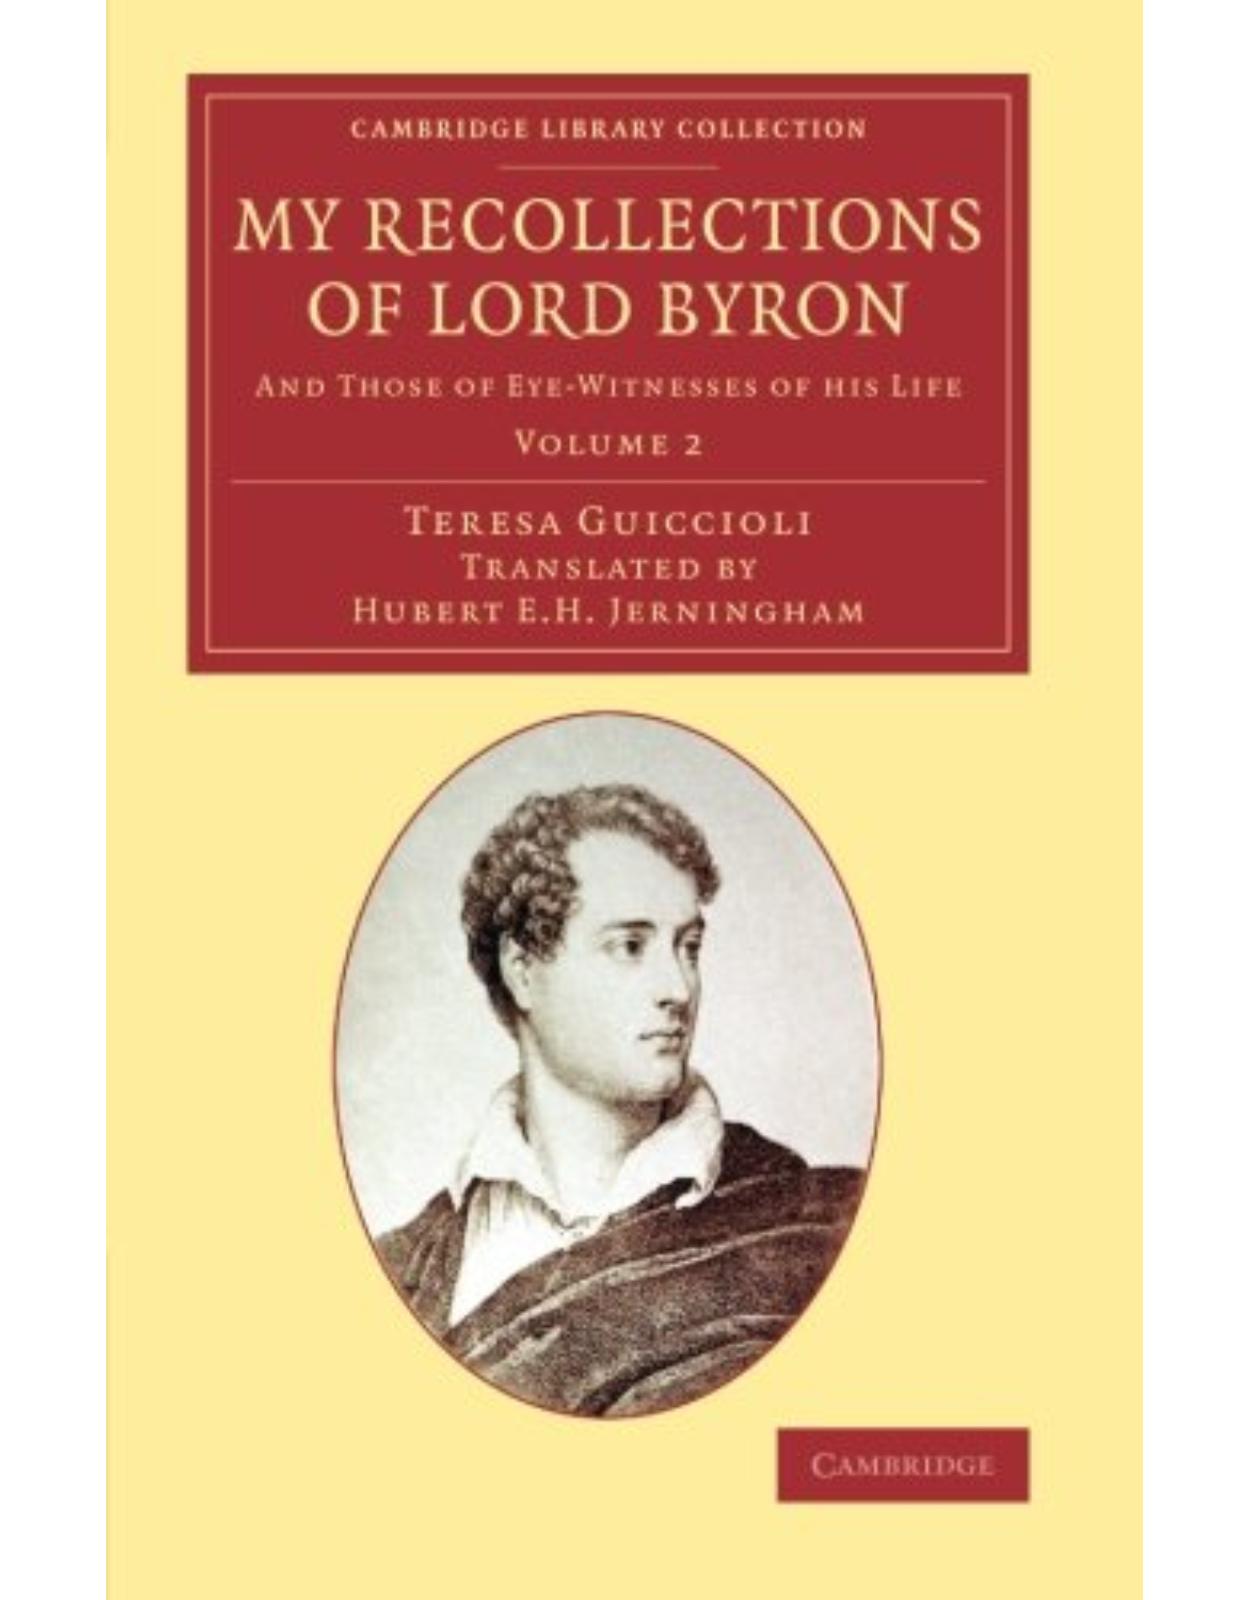 My Recollections of Lord Byron 2 Volume Set: And Those of Eye-Witnesses of his Life